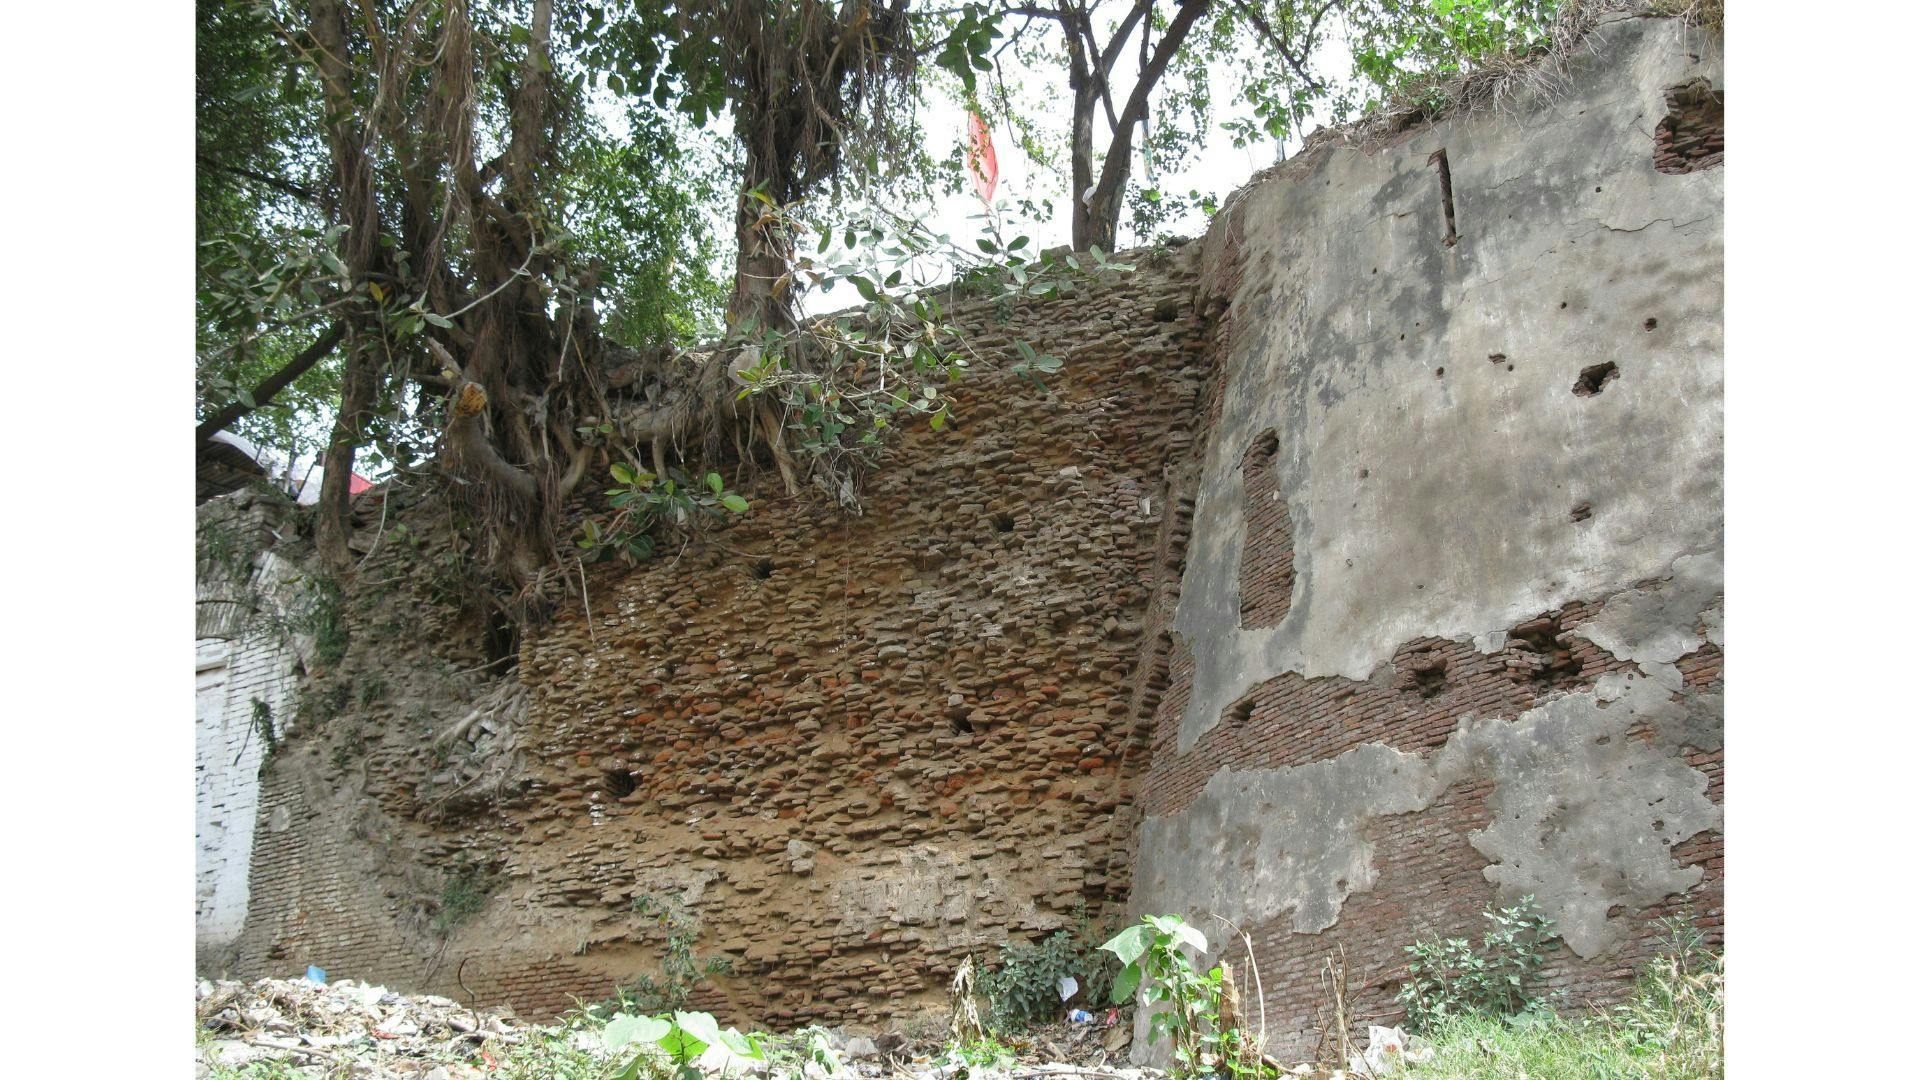 Surviving Wall of Sialkot Fort | Wikimedia Commons